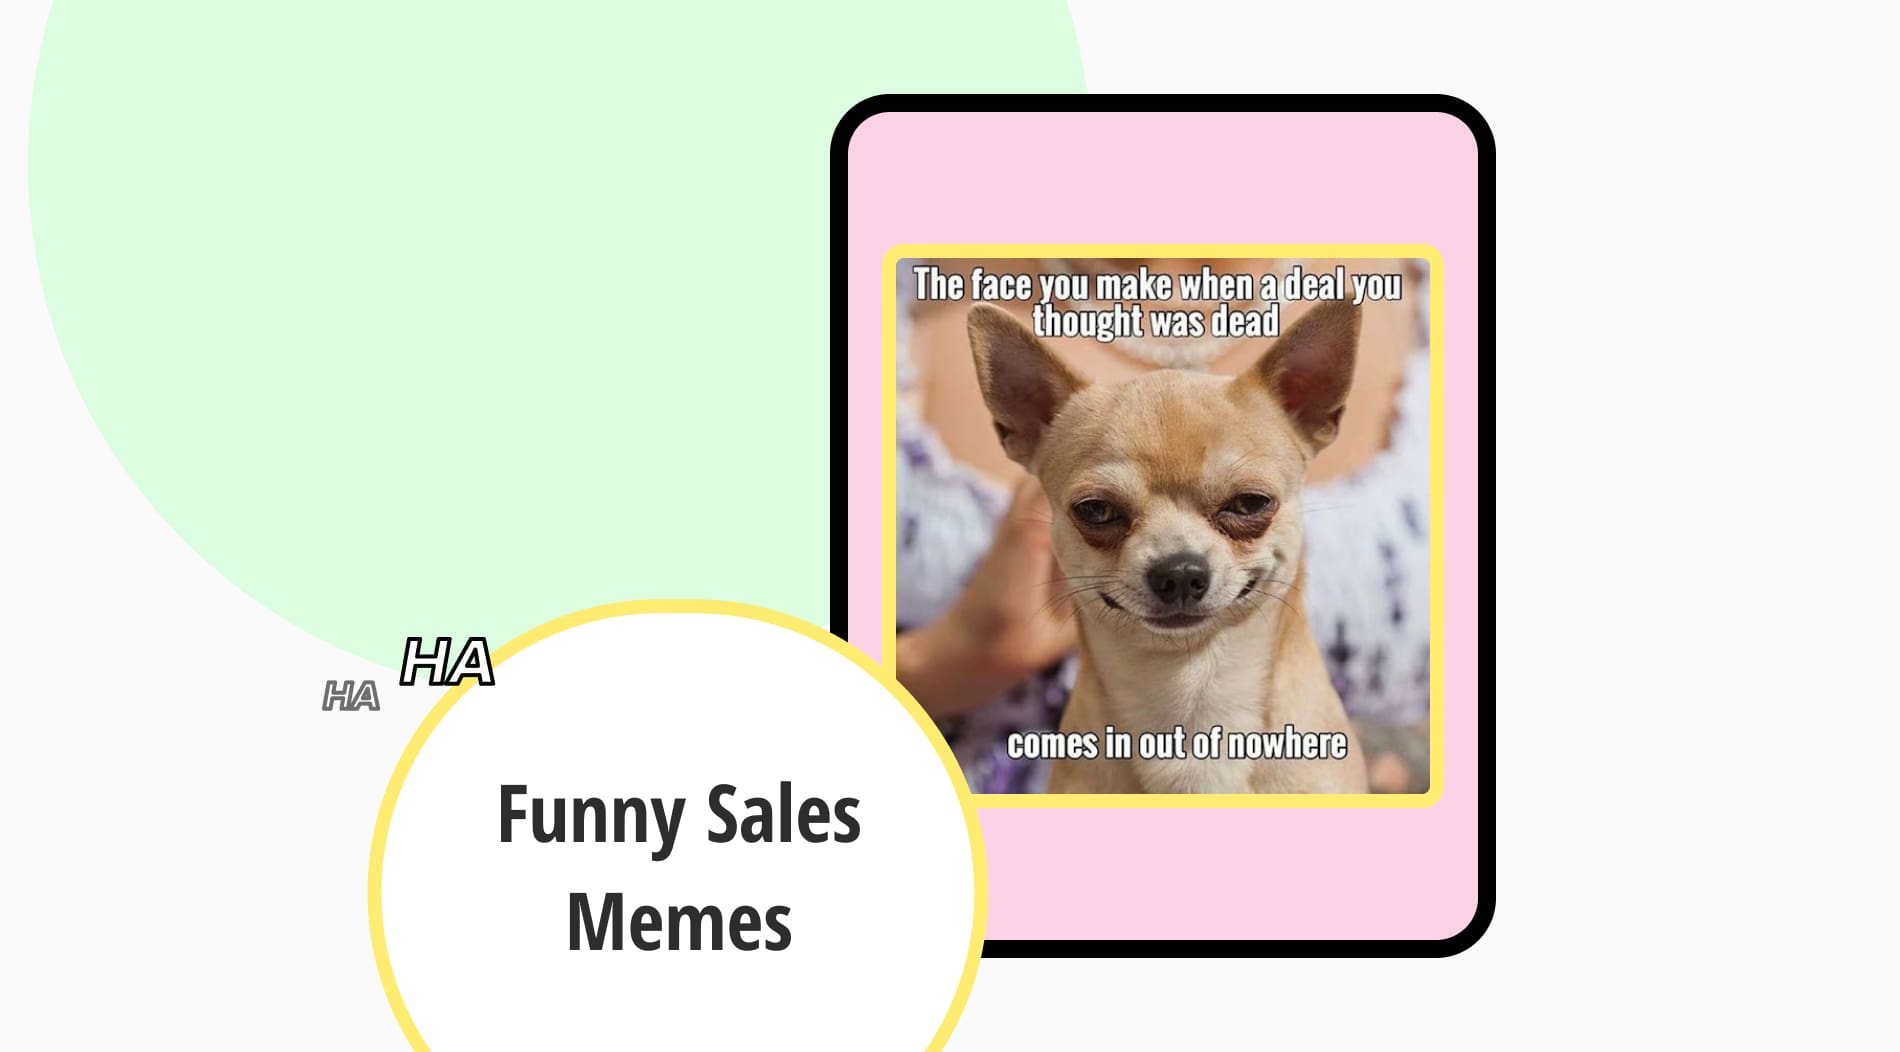 50 Funny sales memes that will make you laugh (or cry)